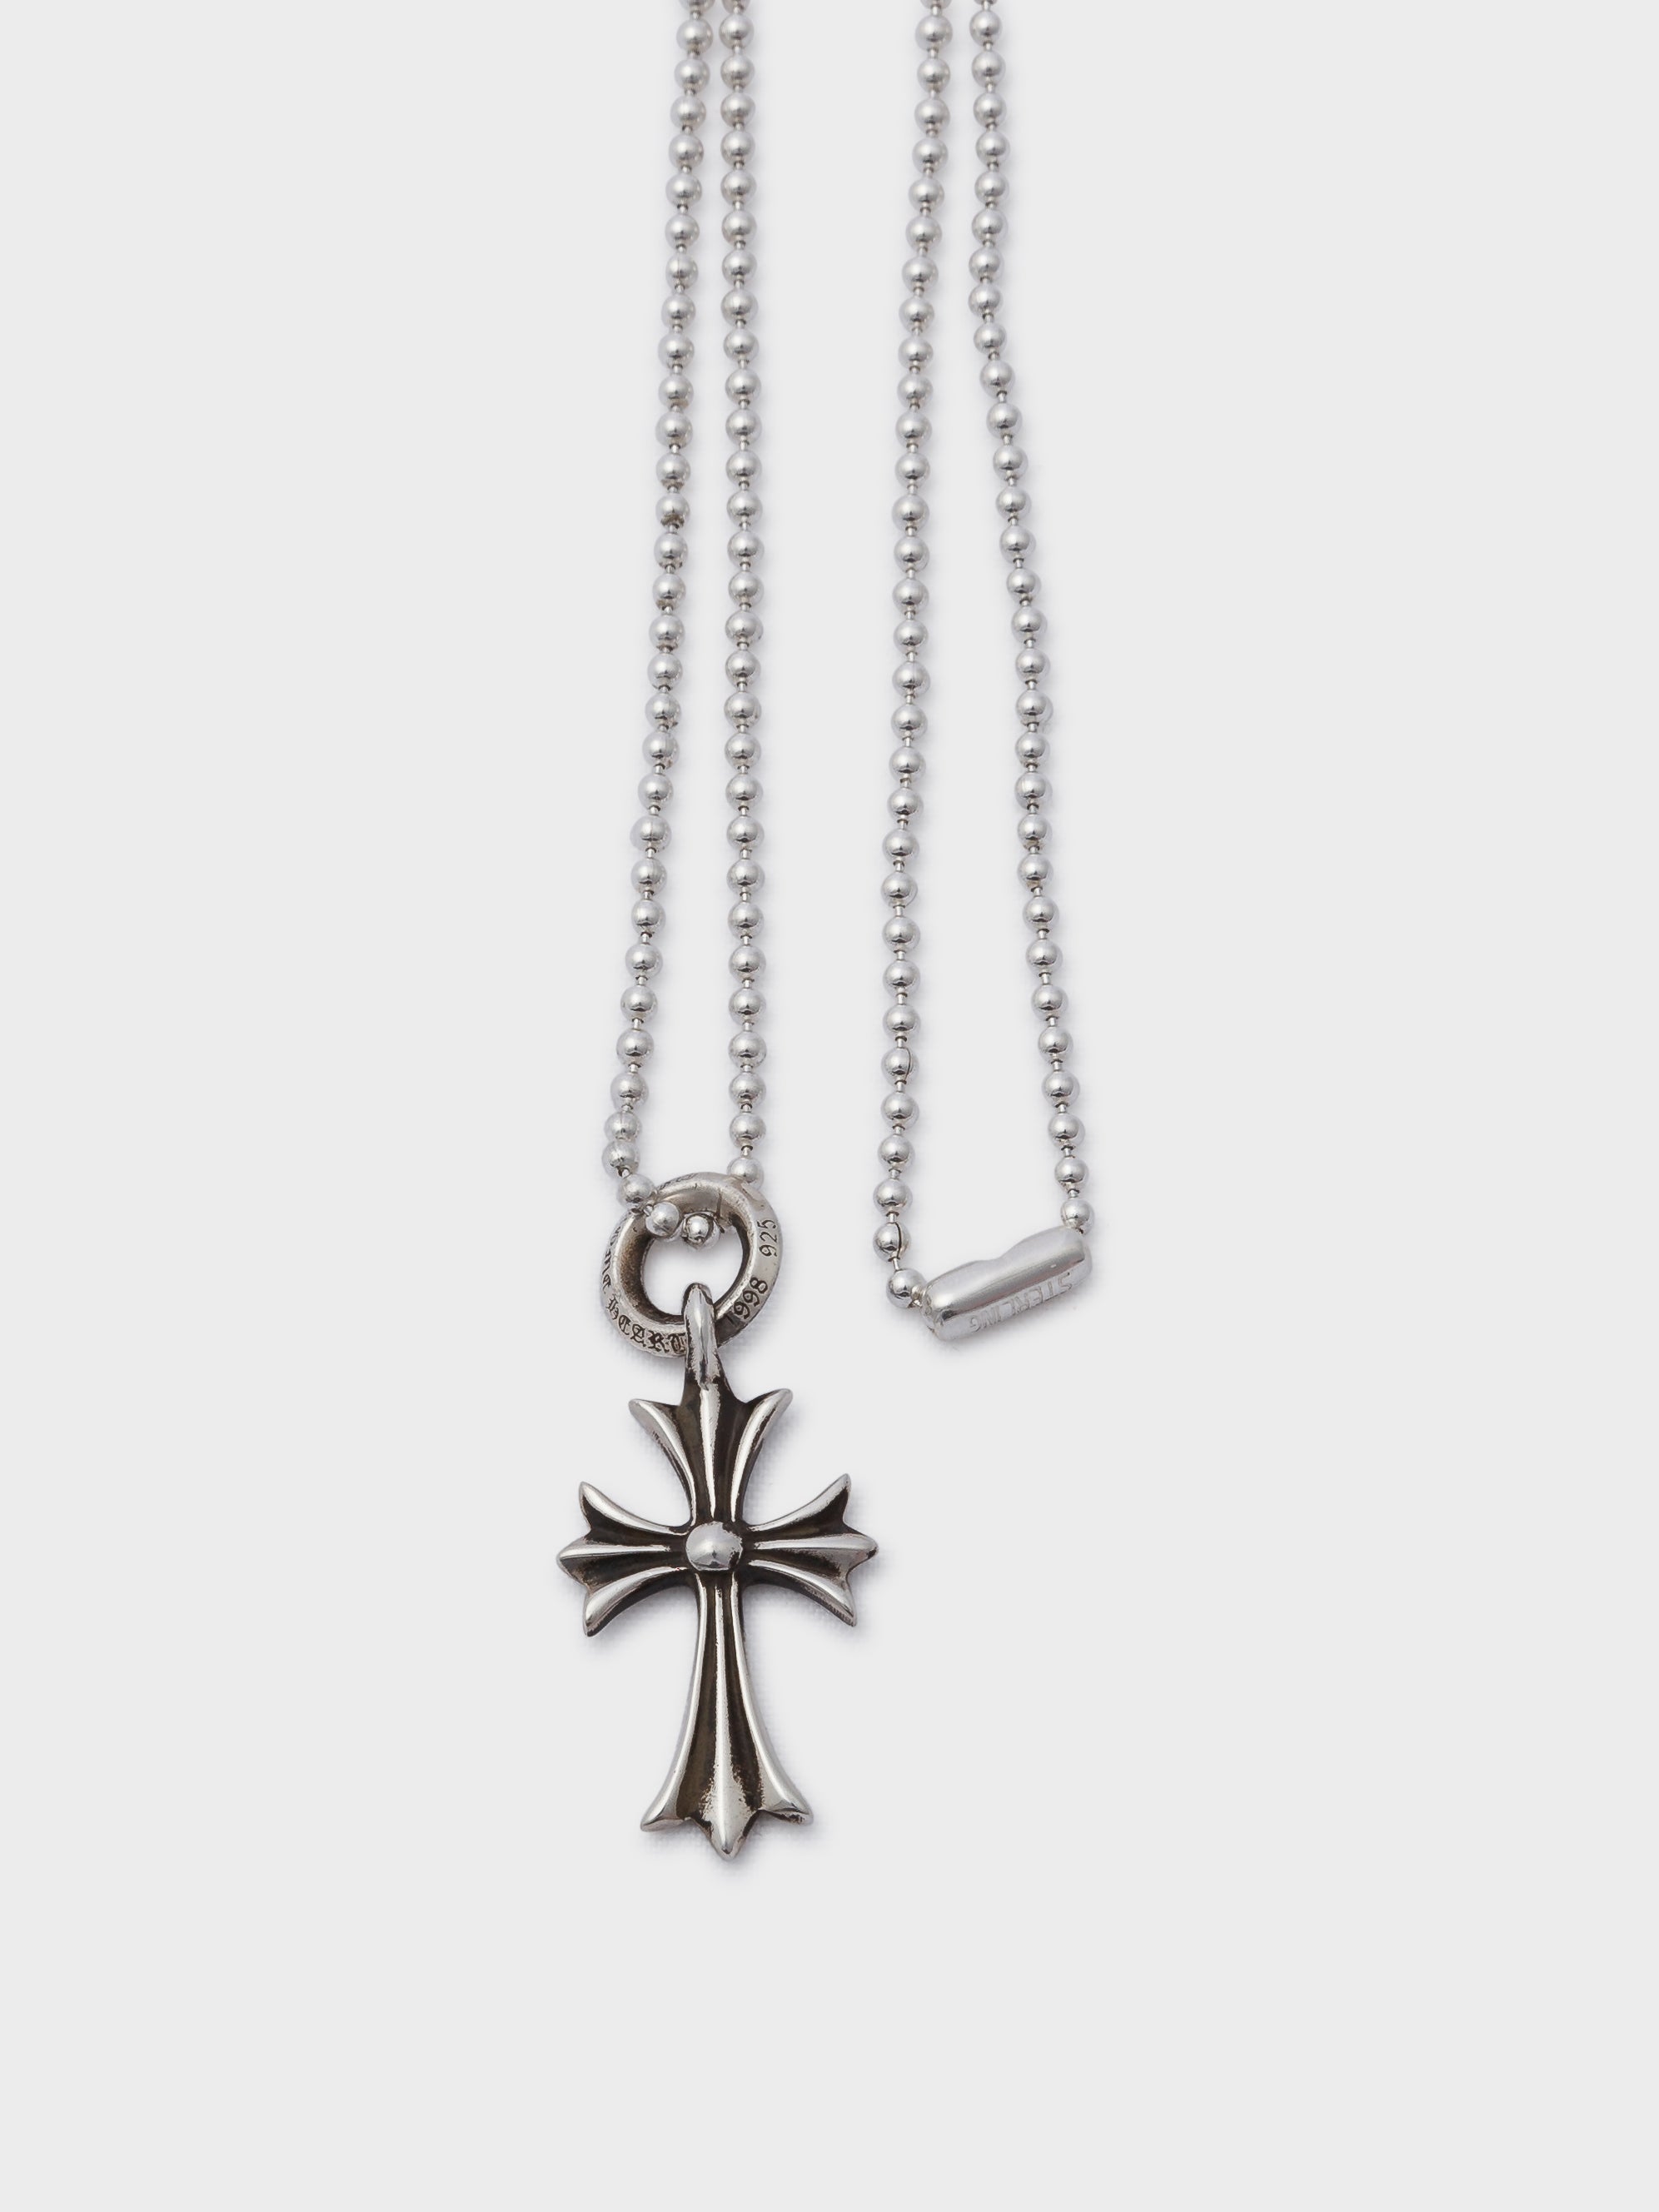 Buy Chrome Hearts Small Cross Pendant Online at Groupie